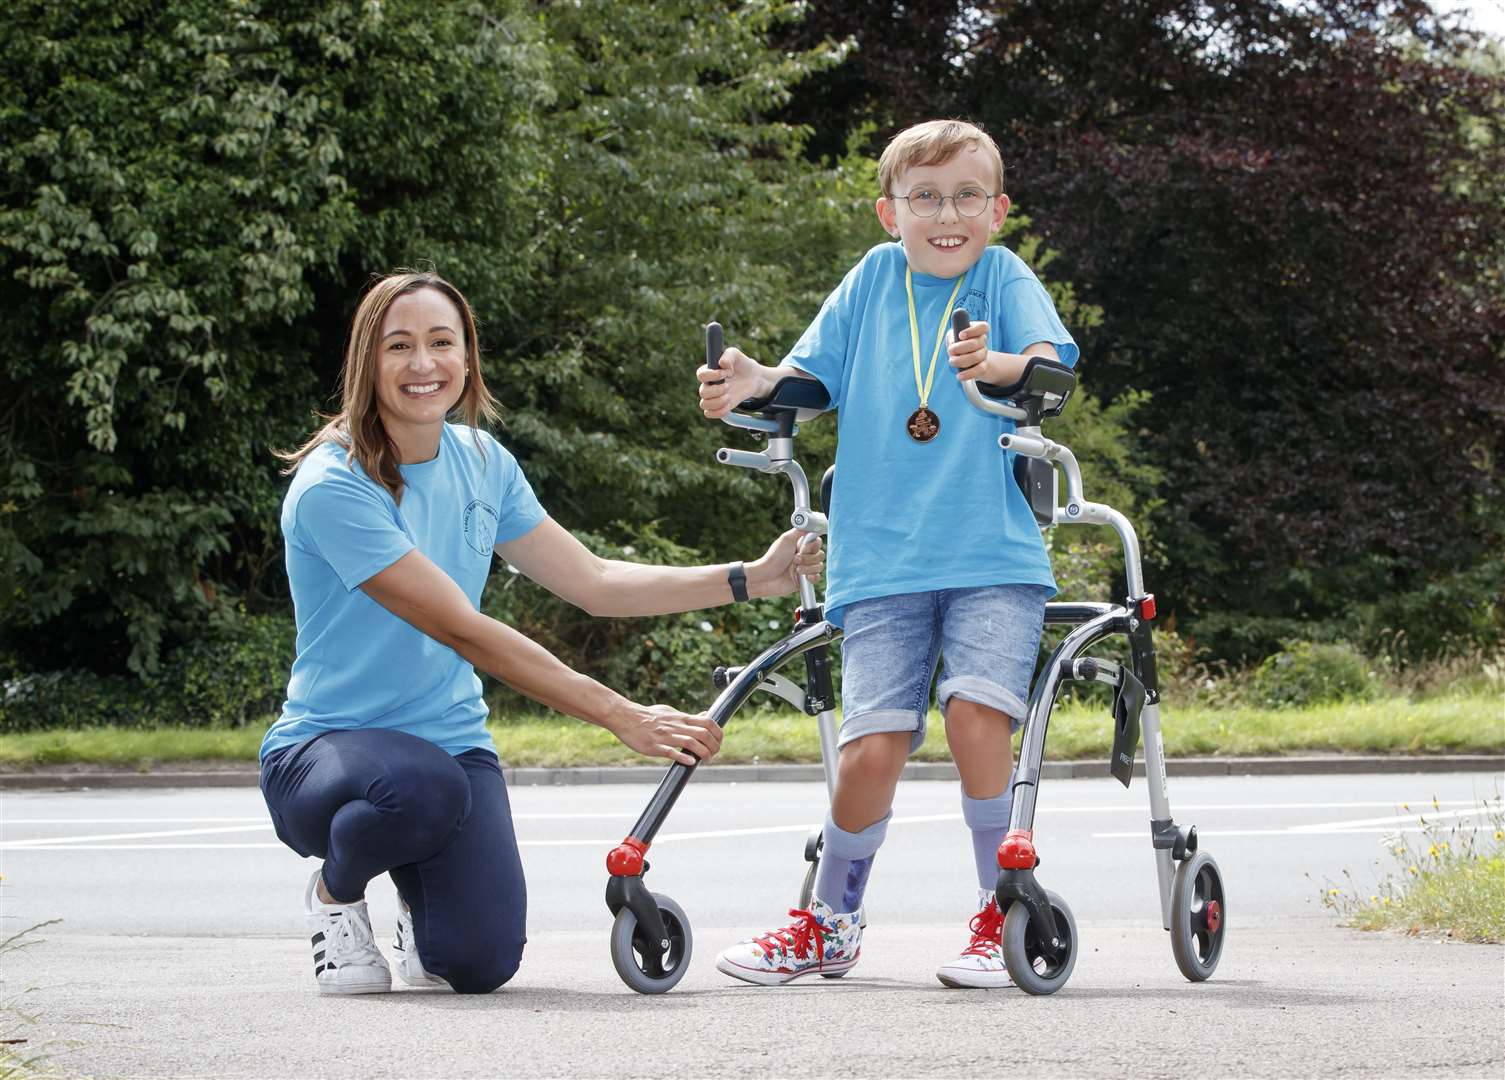 Tobias Weller, who has cerebral palsy and autism, was cheered on in August by Olympic athlete Jessica Ennis-Hill, after he completed his latest challenge to run a marathon in a street near his home in Sheffield, using a race runner. Tobias, who cannot stand or walk unaided, was inspired by Captain Sir Tom Moore to complete his first marathon on his daily walks back in April (Danny Lawson/PA)